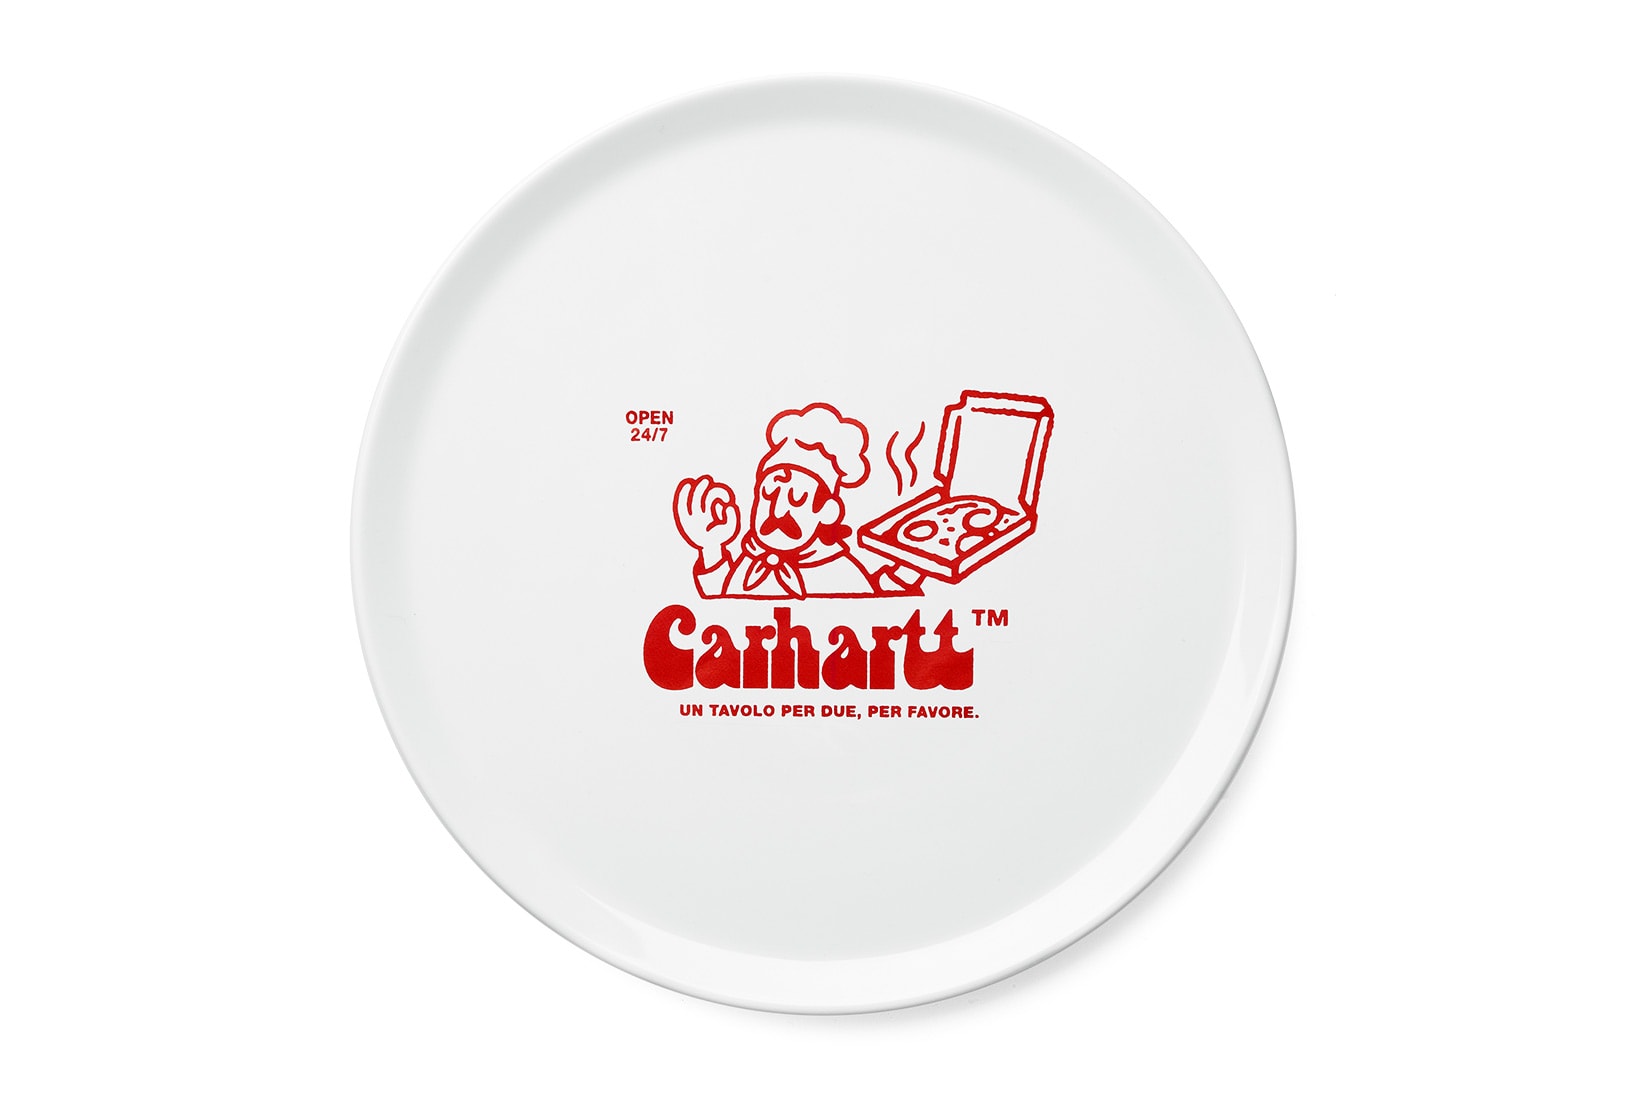 Carhartt WIP Home Gadgets Speakers Pizza Plates Cups Sticky Notes Apron Garden Boules